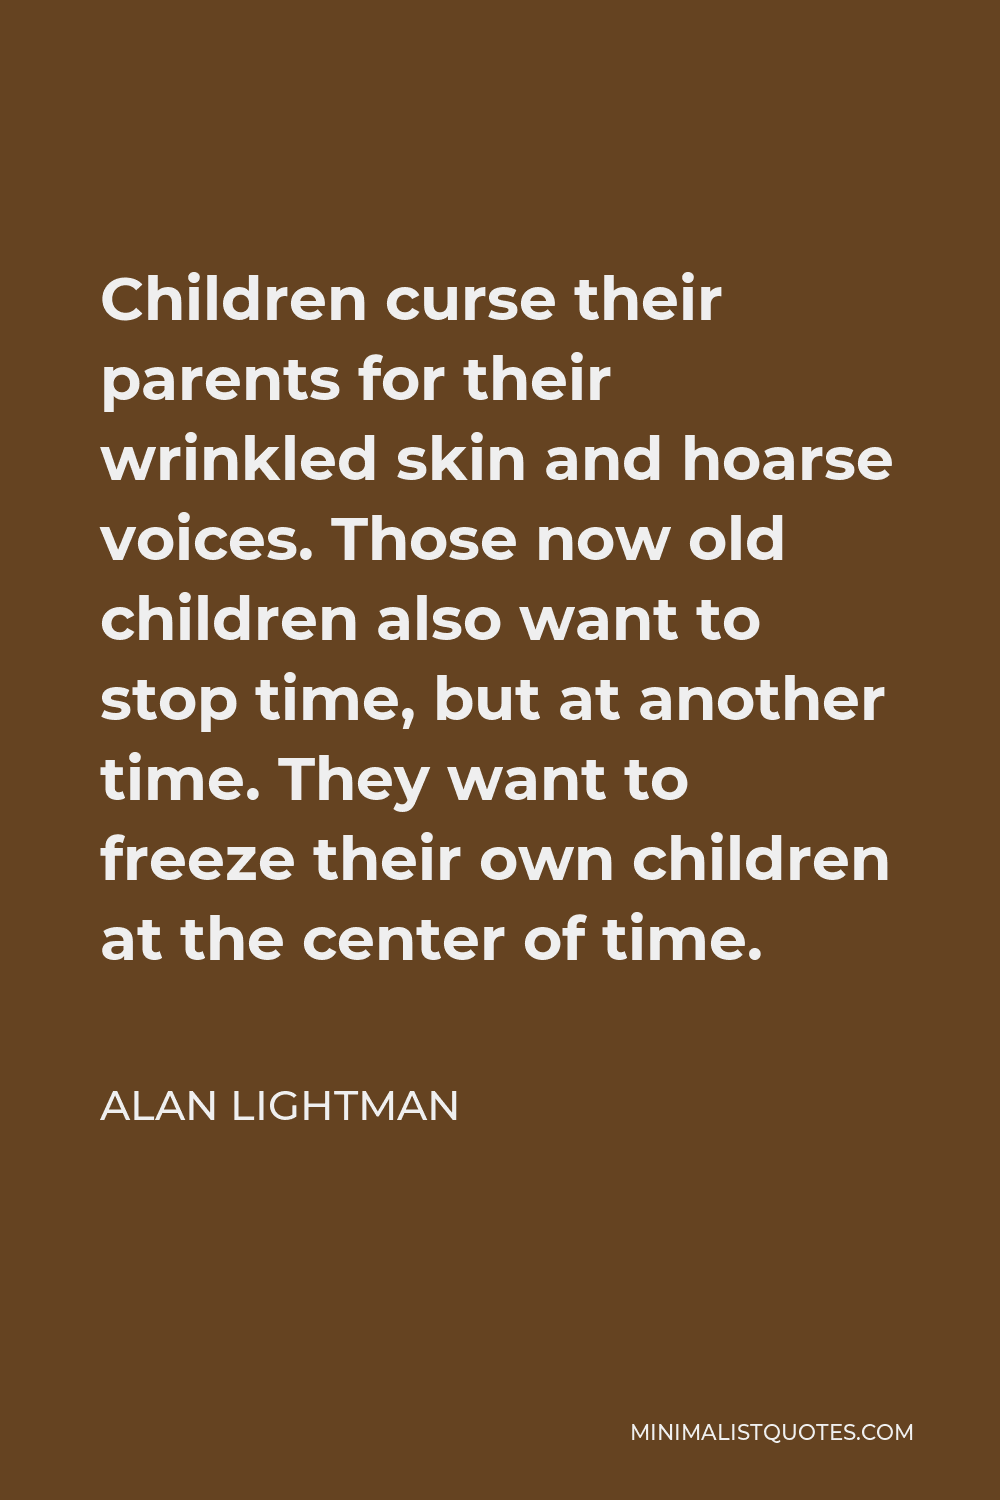 Alan Lightman Quote - Children curse their parents for their wrinkled skin and hoarse voices. Those now old children also want to stop time, but at another time. They want to freeze their own children at the center of time.